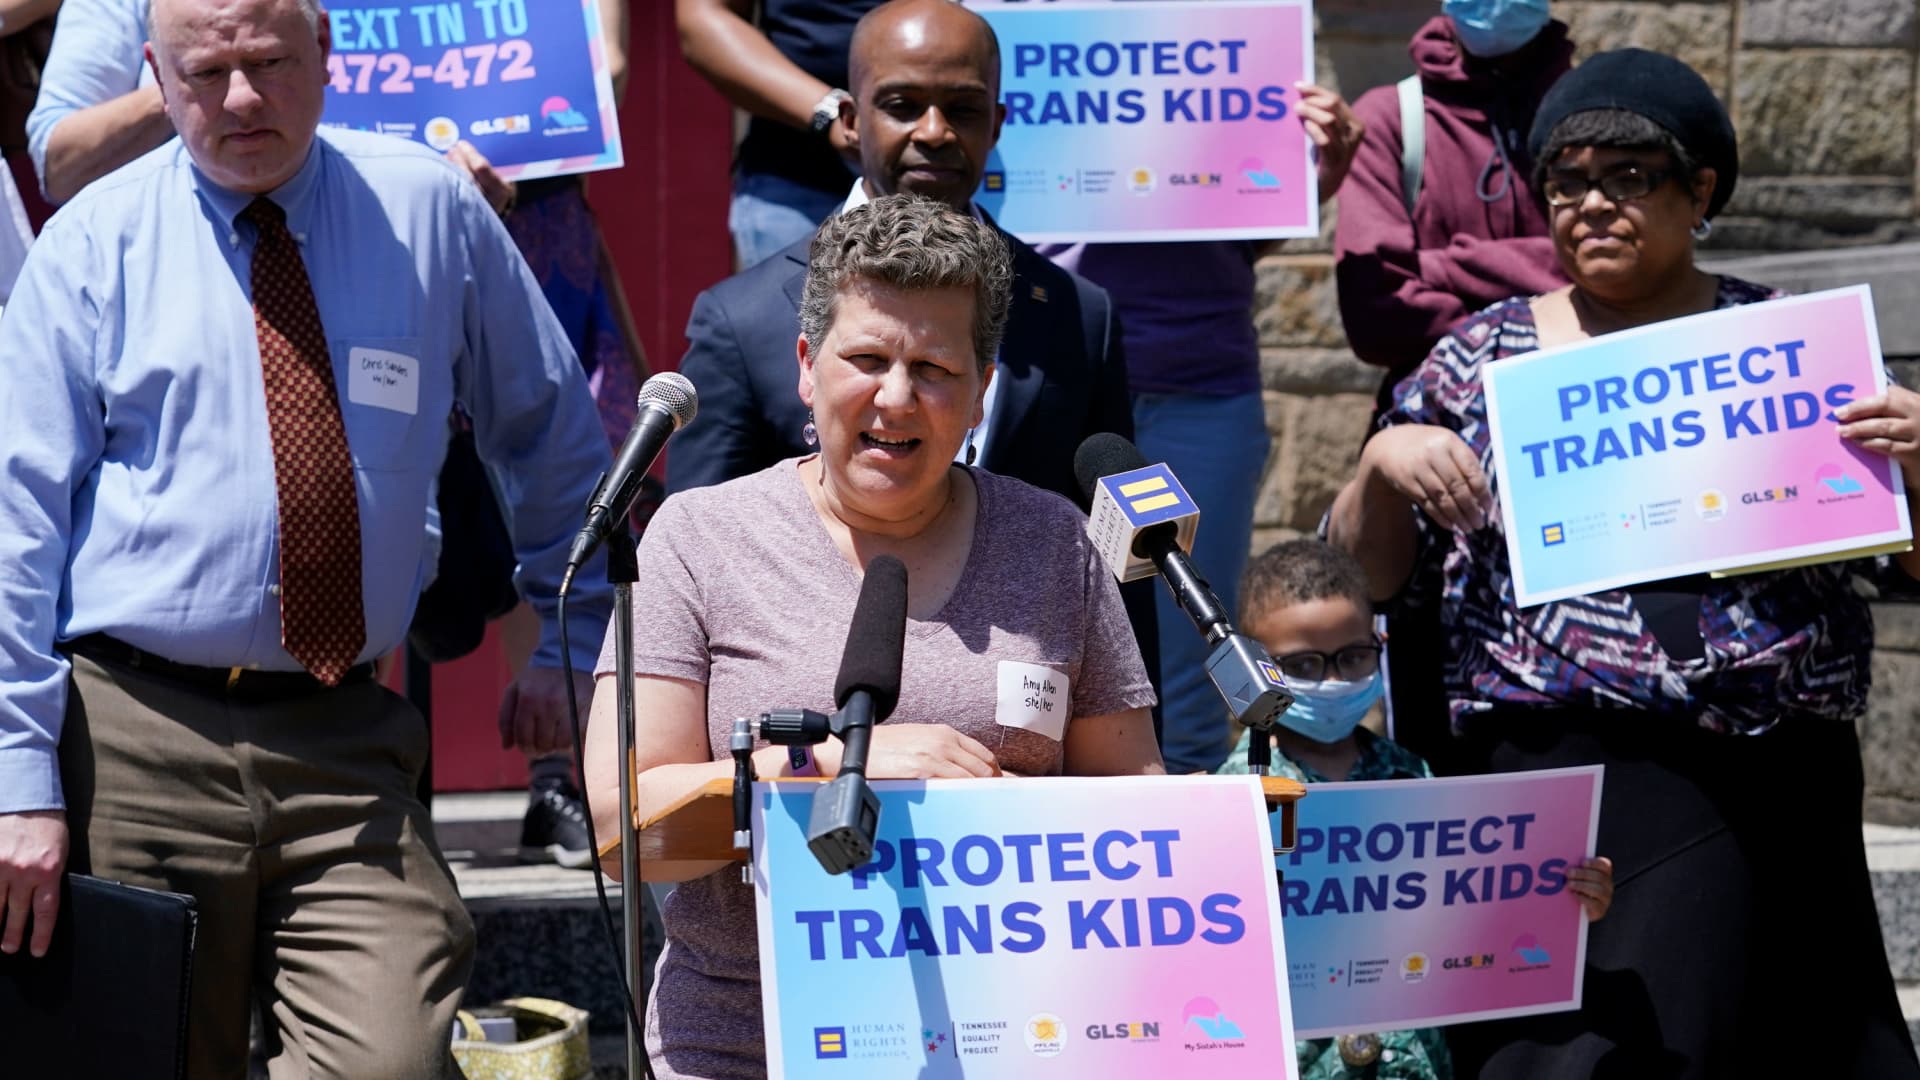 Amy Allen, the mother of an 8th grade transgender son, speaks after a Human Rights Campaign round table discussion on anti-transgender laws Friday, May 21, 2021, in Nashville, Tenn.